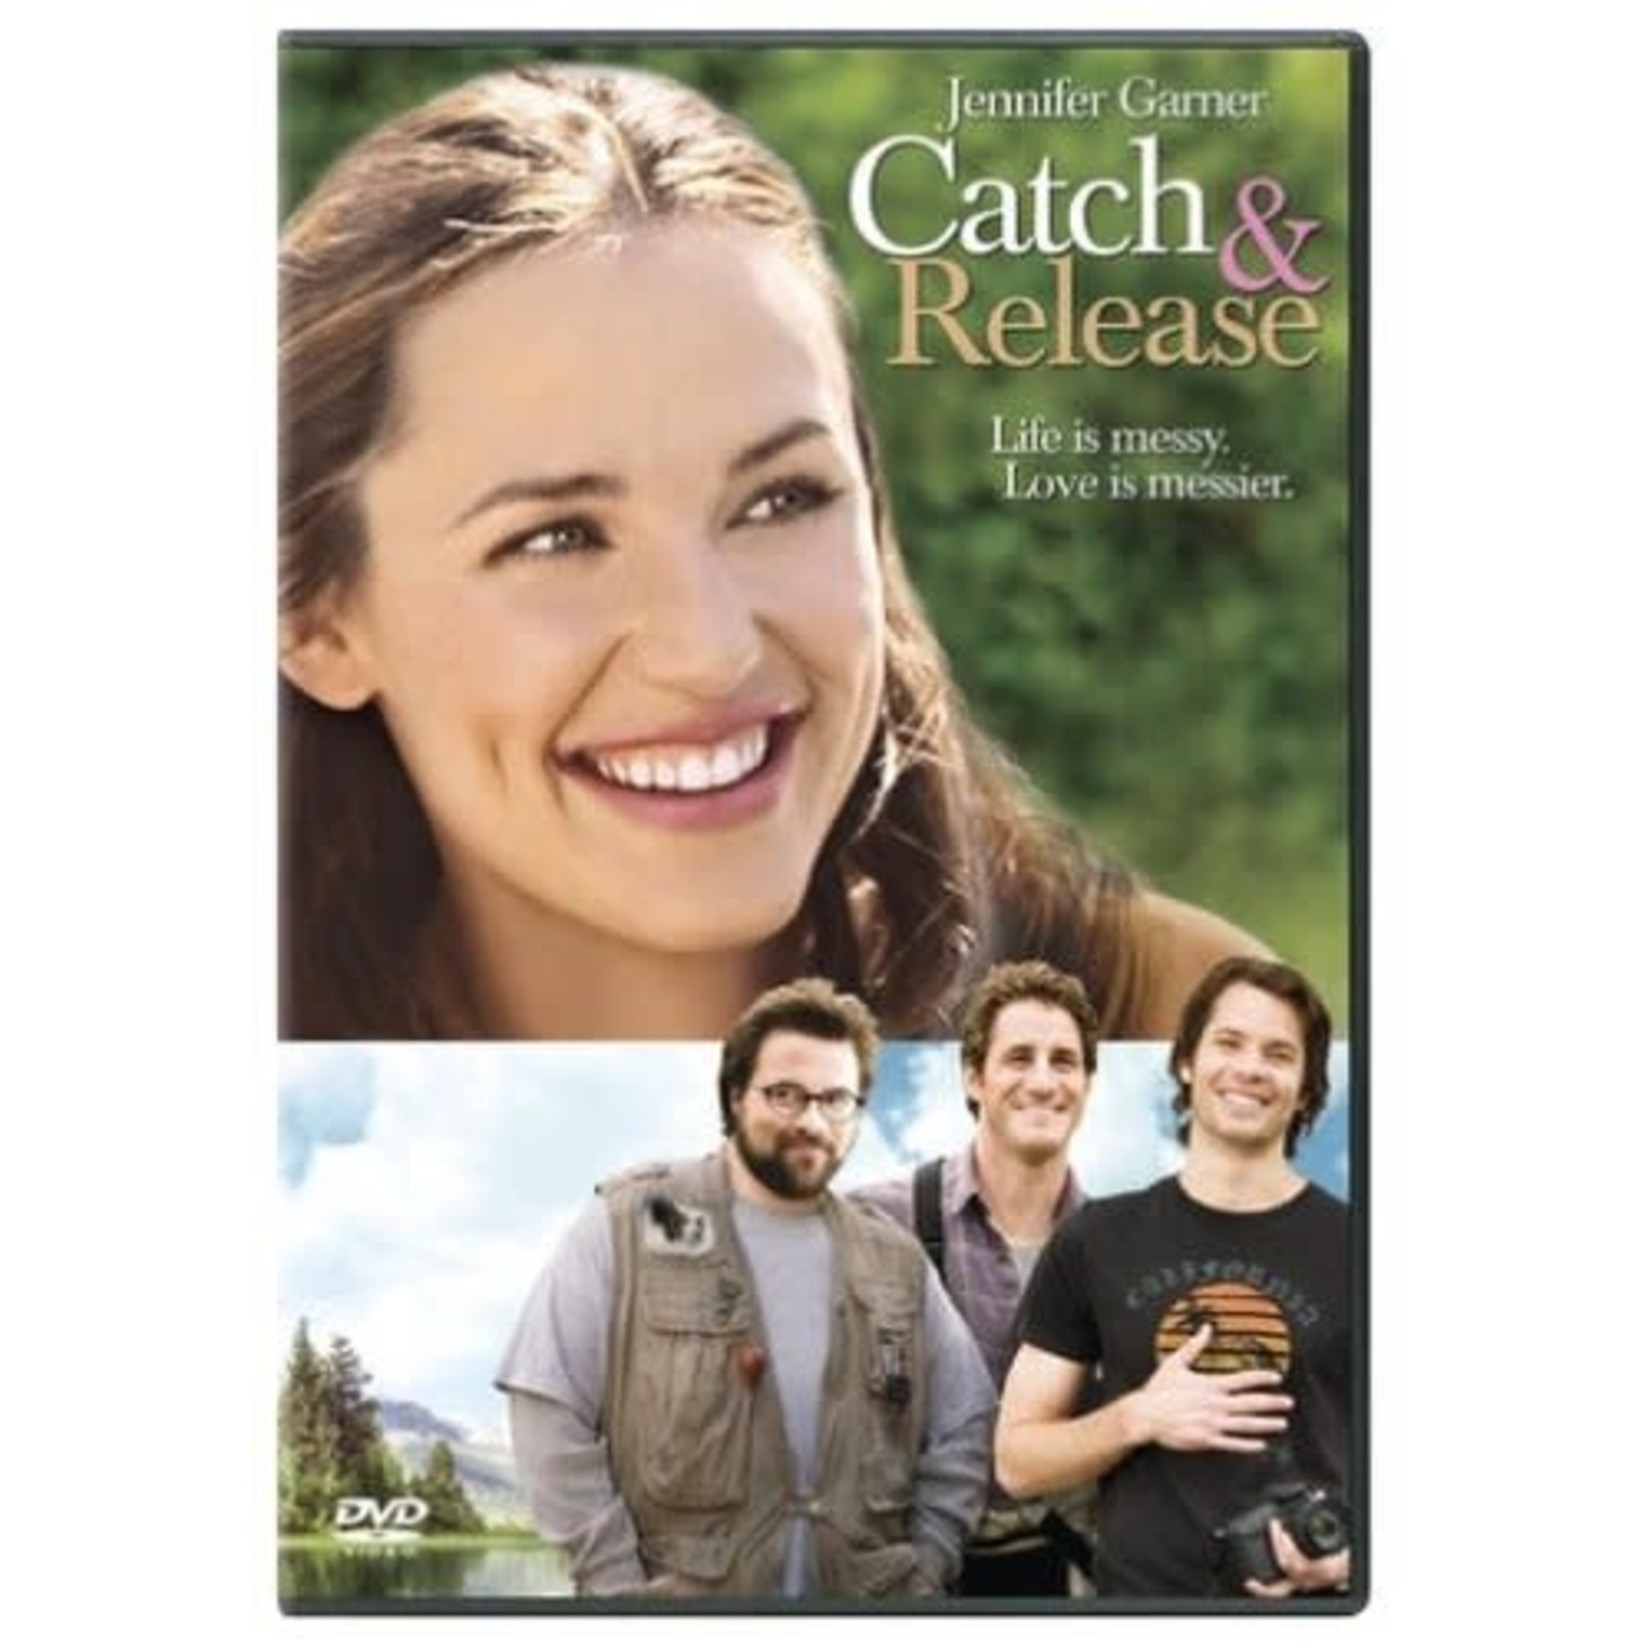 Catch & Release (2006) [USED DVD]